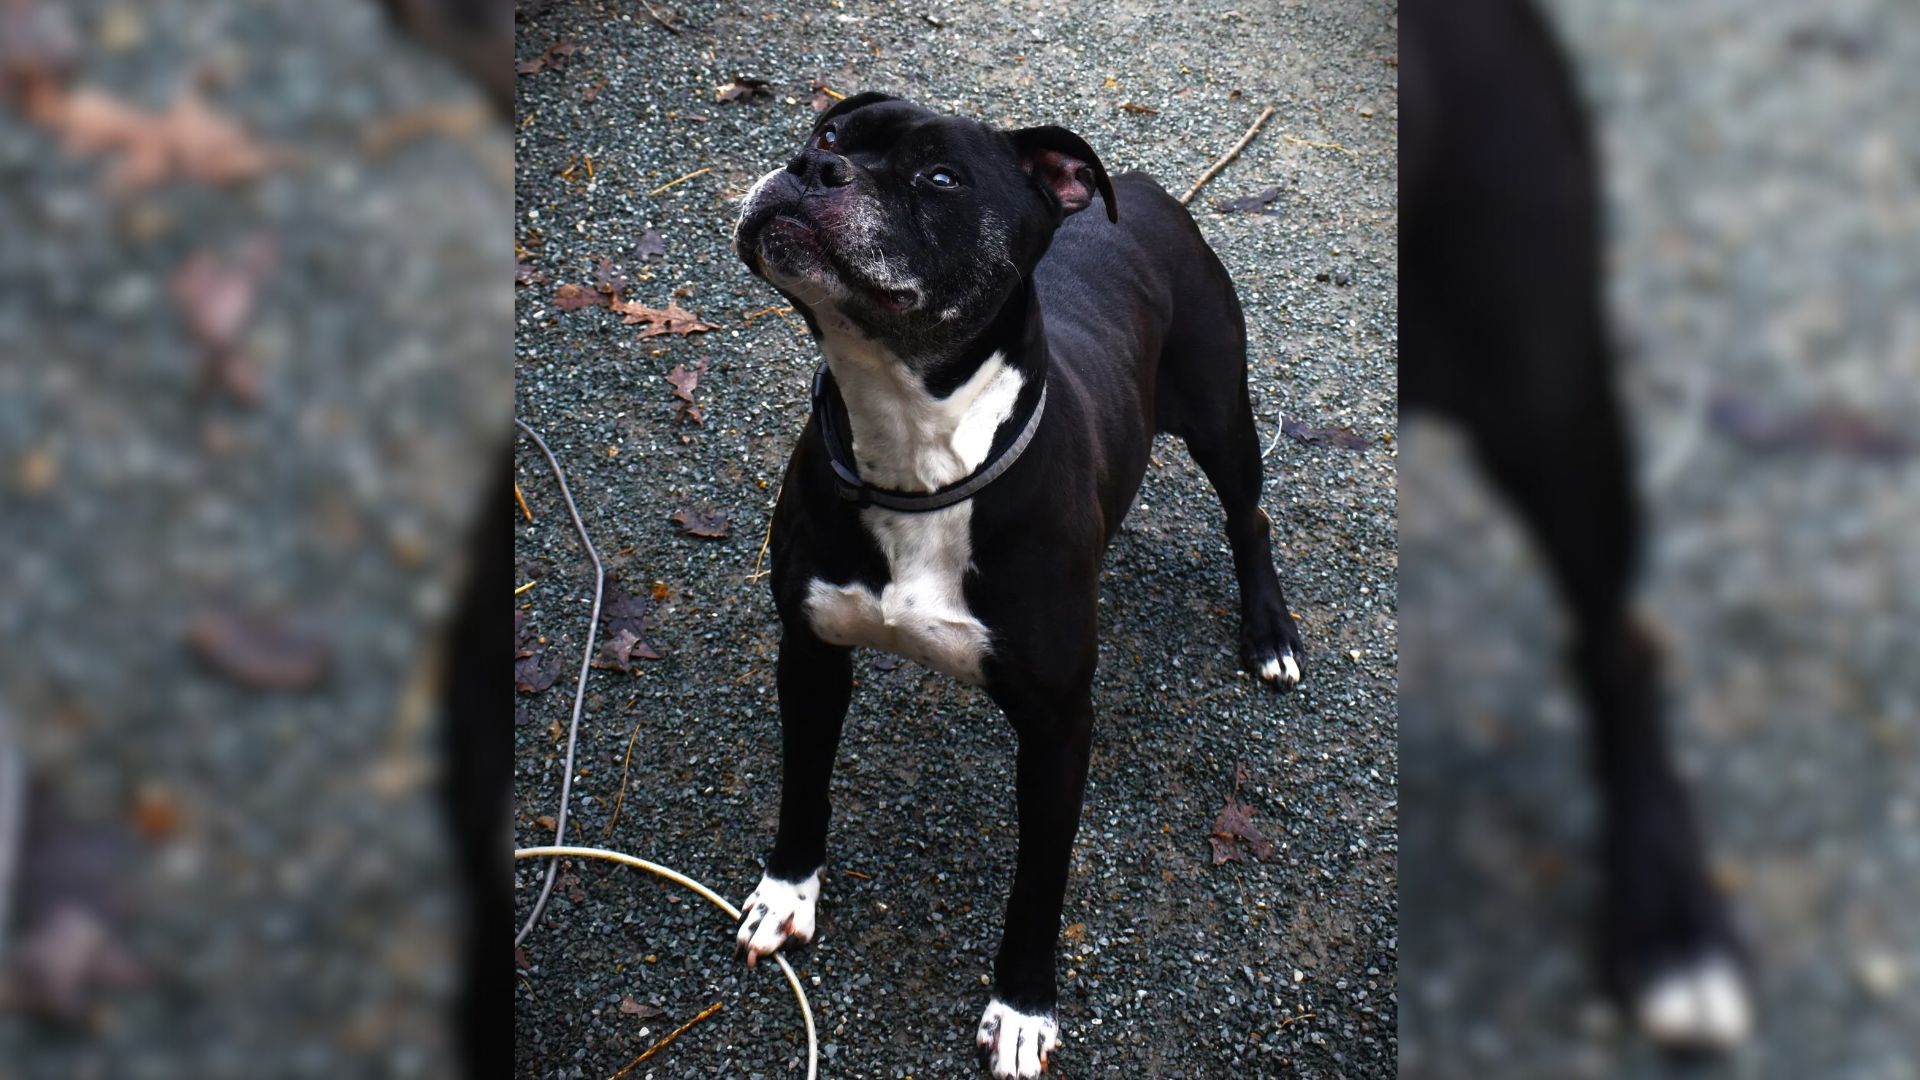 After 10 Years At Shelter, Rescuers Plead To Find This Lovely Dog A Home She Deserves